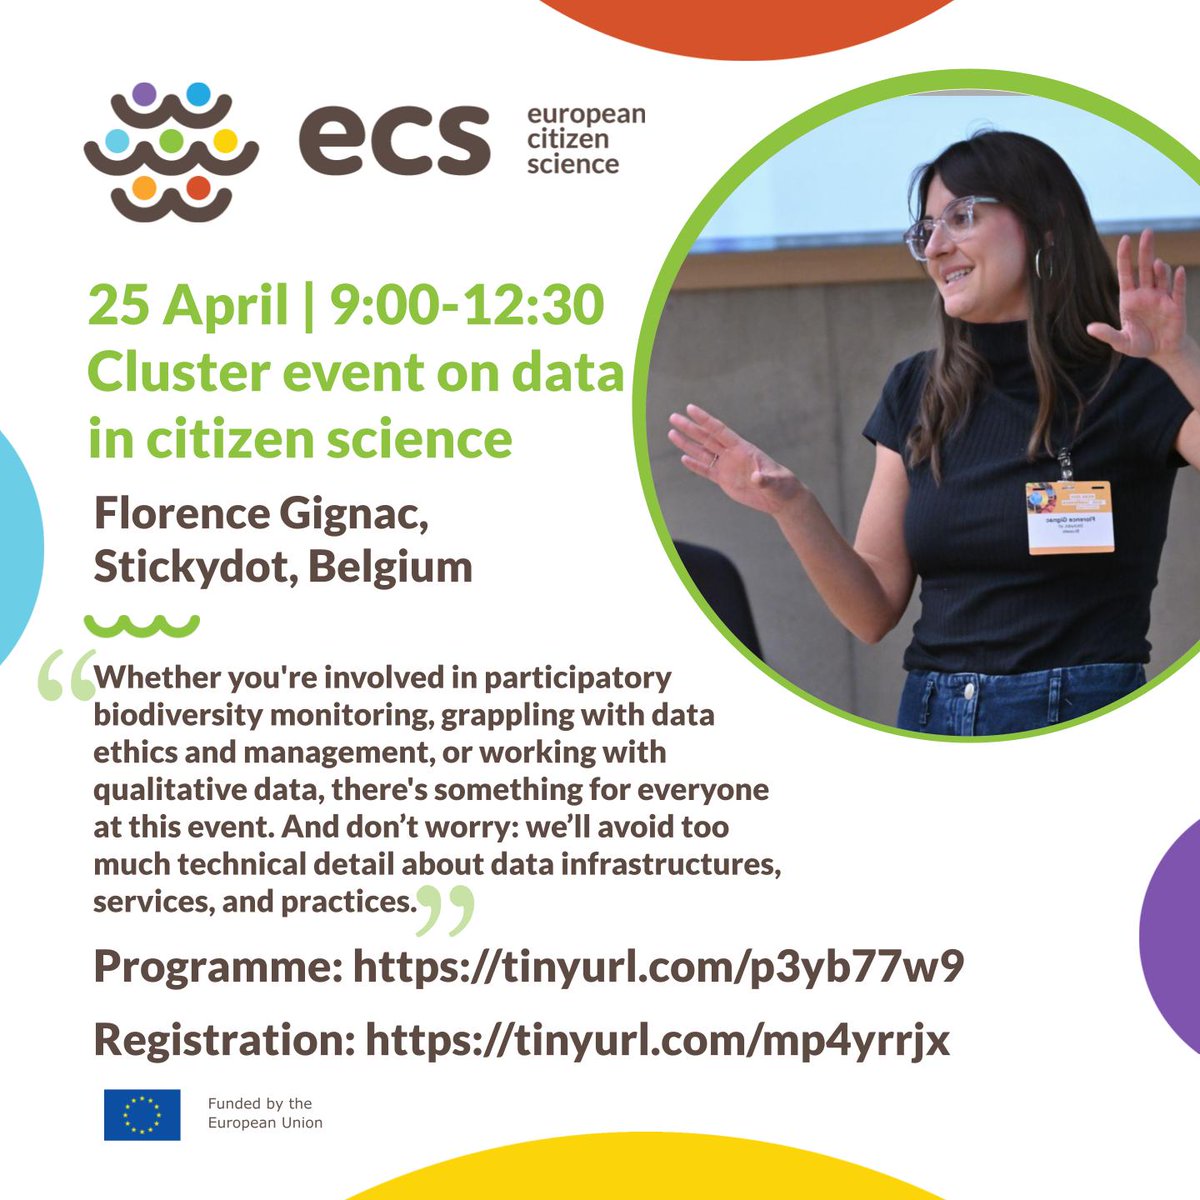 ECS CLUSTER EVENT TOMORROW 𝗟𝗲𝘁'𝘀 𝗱𝗶𝘀𝗰𝘂𝘀𝘀 𝗱𝗮𝘁𝗮 𝗶𝗻 𝗰𝗶𝘁𝗶𝘇𝗲𝗻 𝘀𝗰𝗶𝗲𝗻𝗰𝗲 When: 25 April Program: tinyurl.com/p3yb77w9 You are still in time to register: tinyurl.com/mp4yrrjx @stickydoteu @REA_research